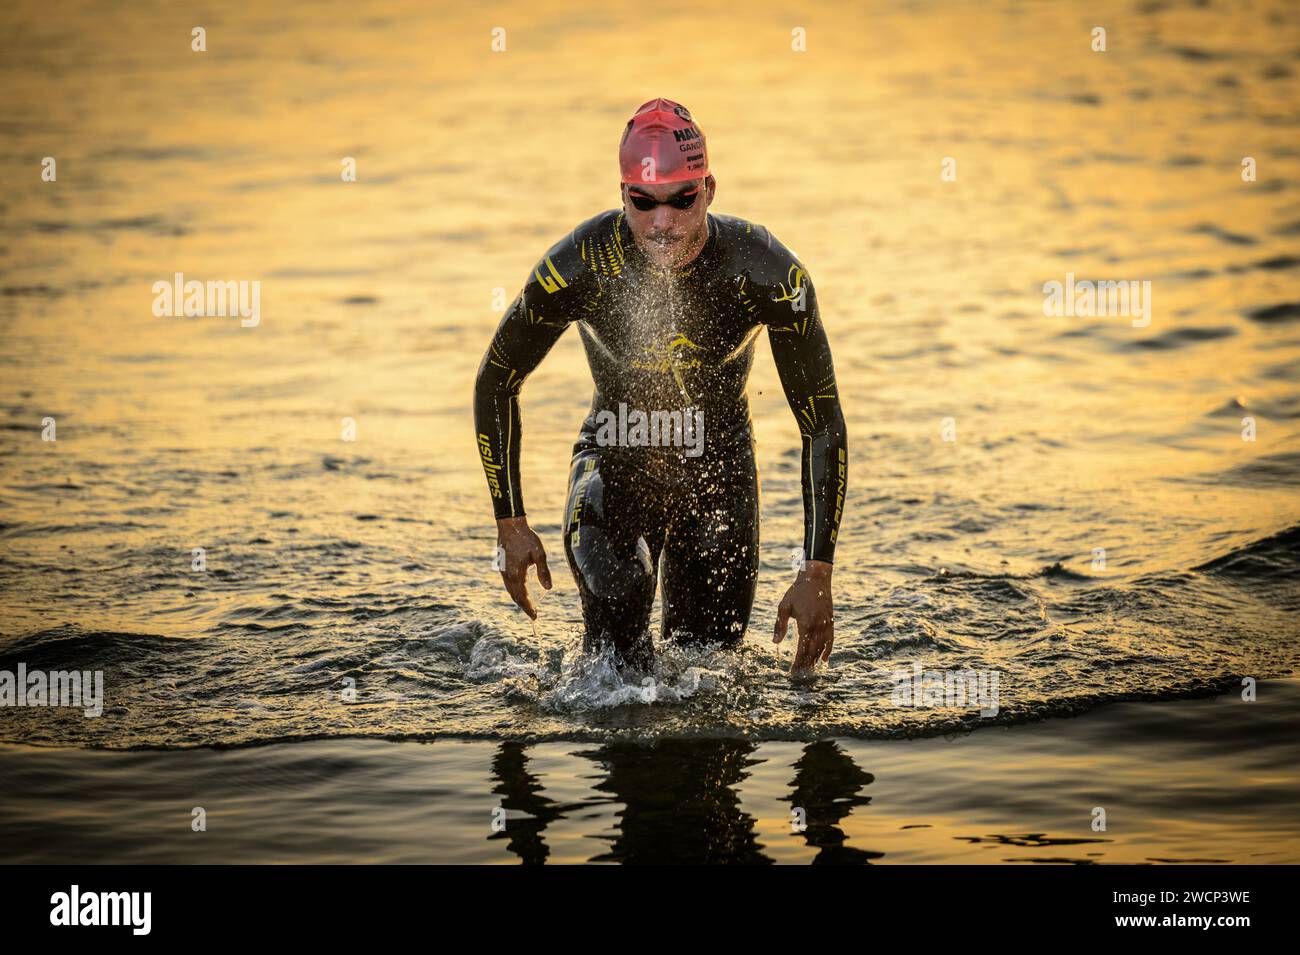 First place triathlete exiting the water in a wetsuit blowing during a beautiful sunrise to switch to the cycling sector in Gandia, Valencia, Spain Stock Photo